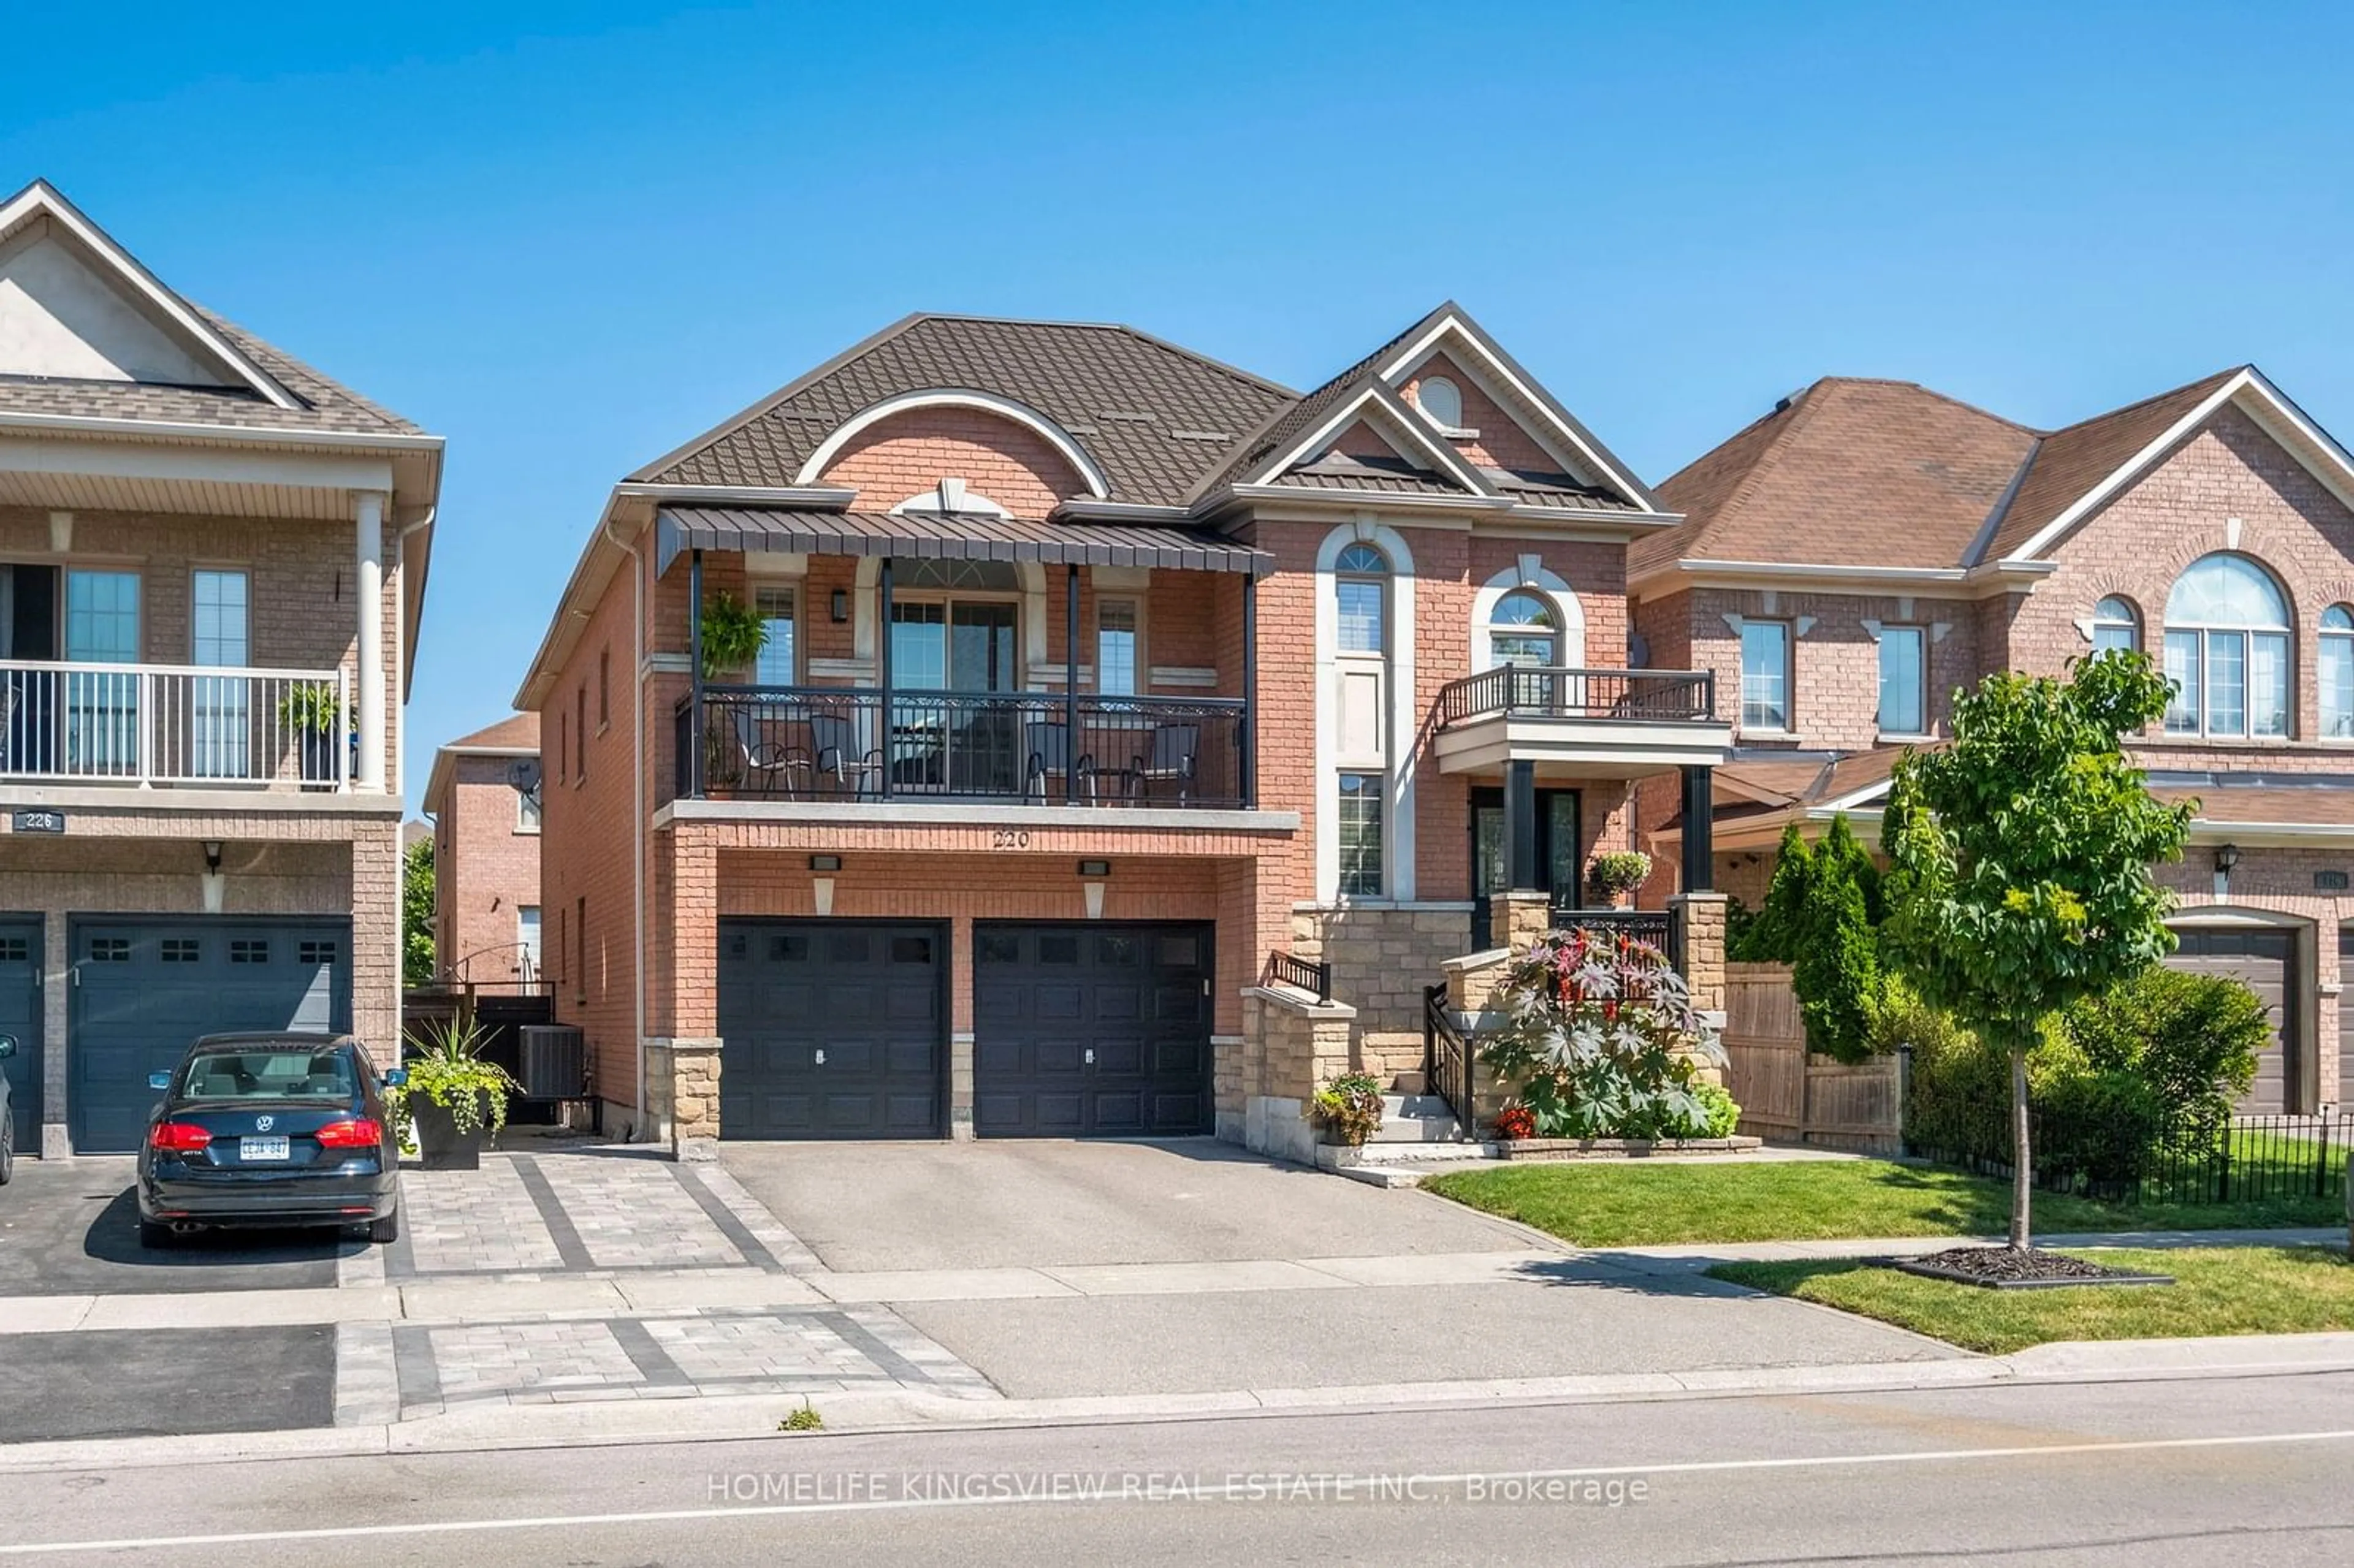 Home with brick exterior material for 220 Peak Point Blvd, Vaughan Ontario L6A 0B4